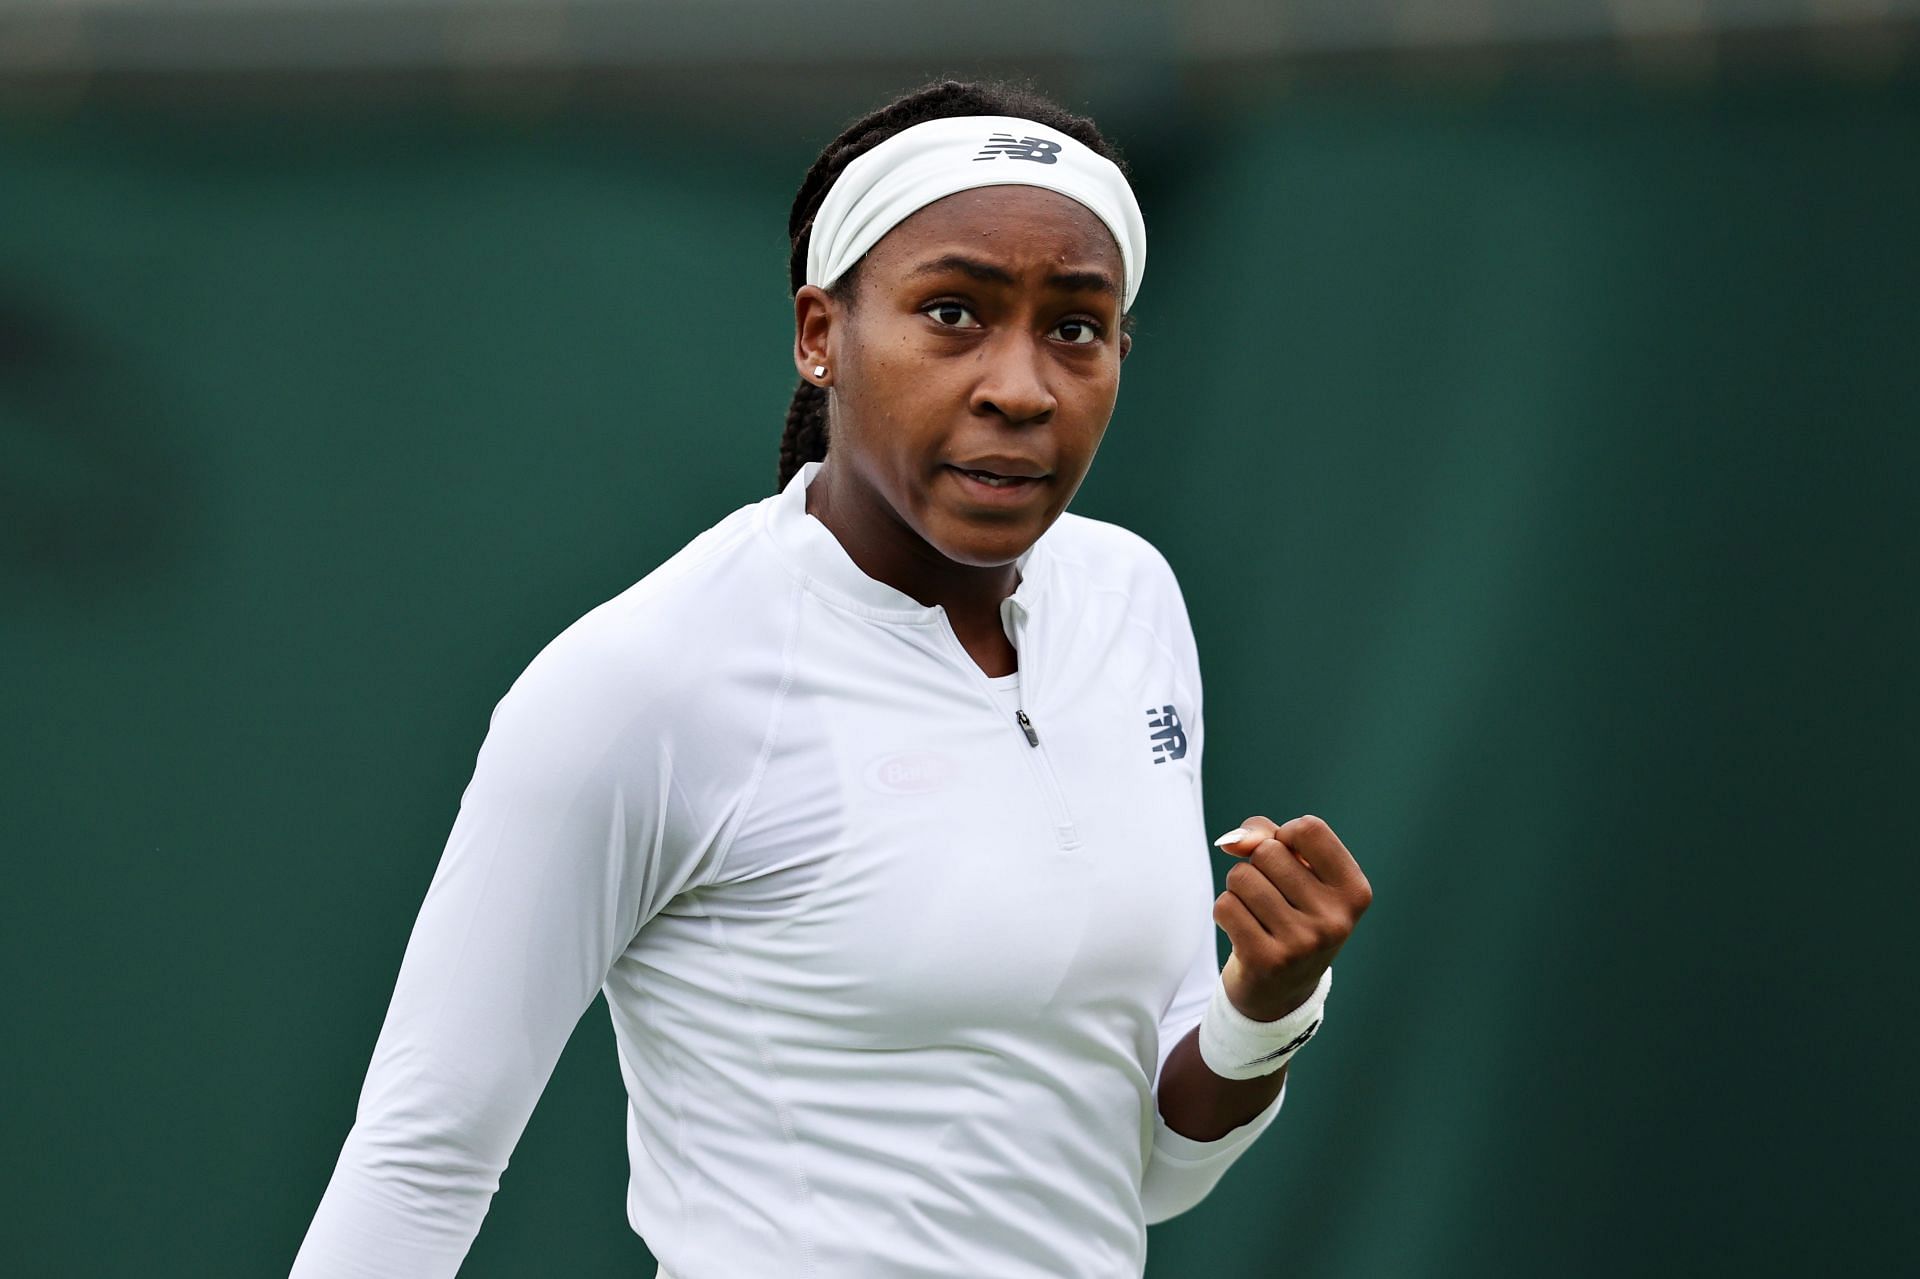 Coco Gauff is scheduled to play next at the Mubadala Silicon Valley Classic